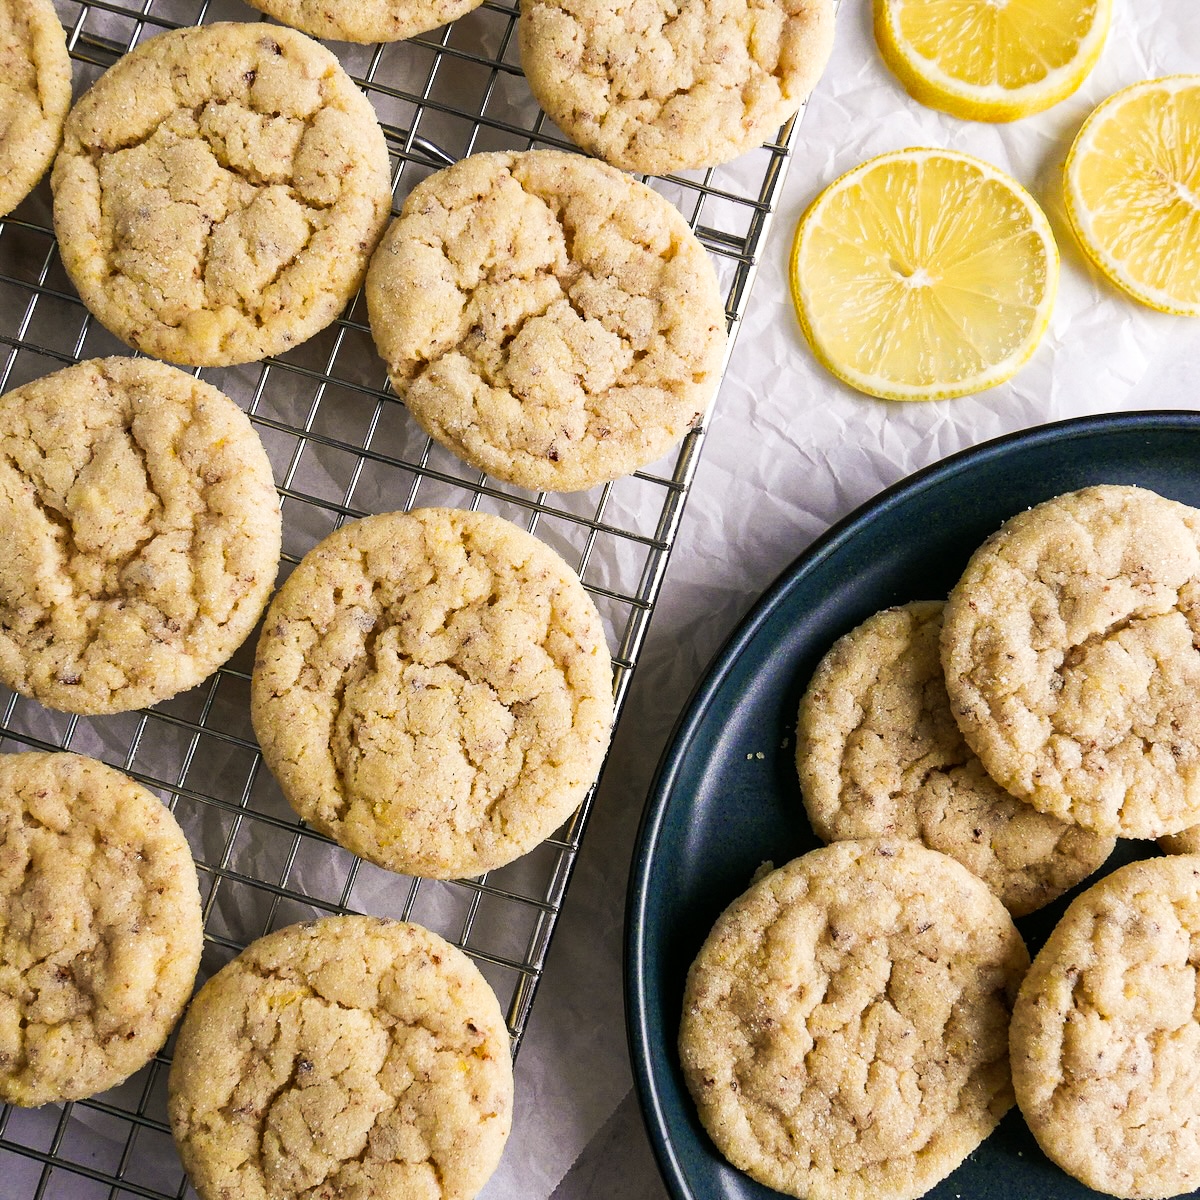 Chewy lemon cookies cooling on a wire rack.